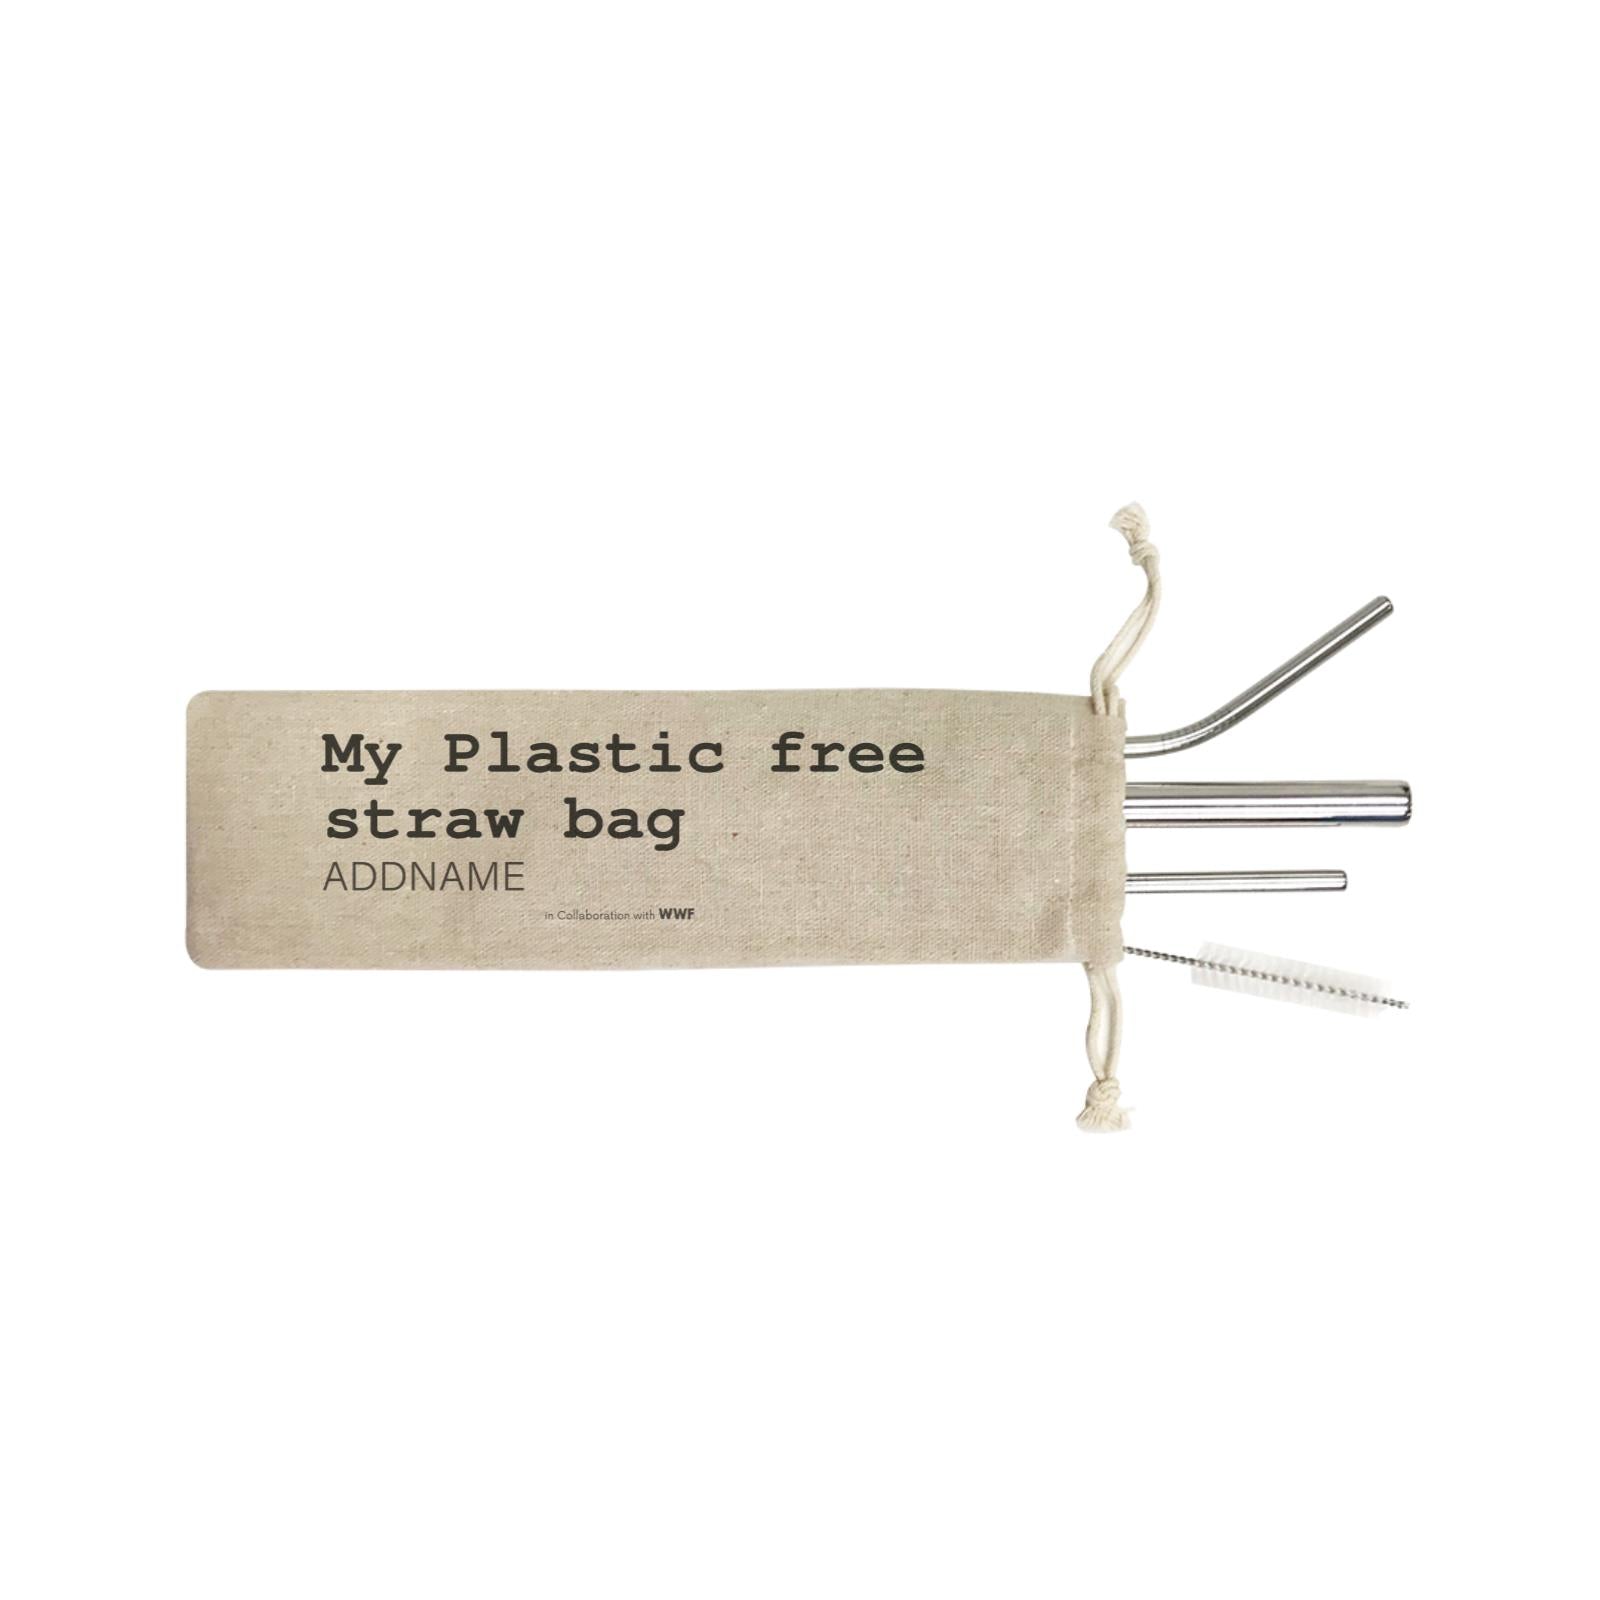 My Plastic Free Straw Bag Addname SB 4-In-1 Stainless Steel Straw Set in Satchel